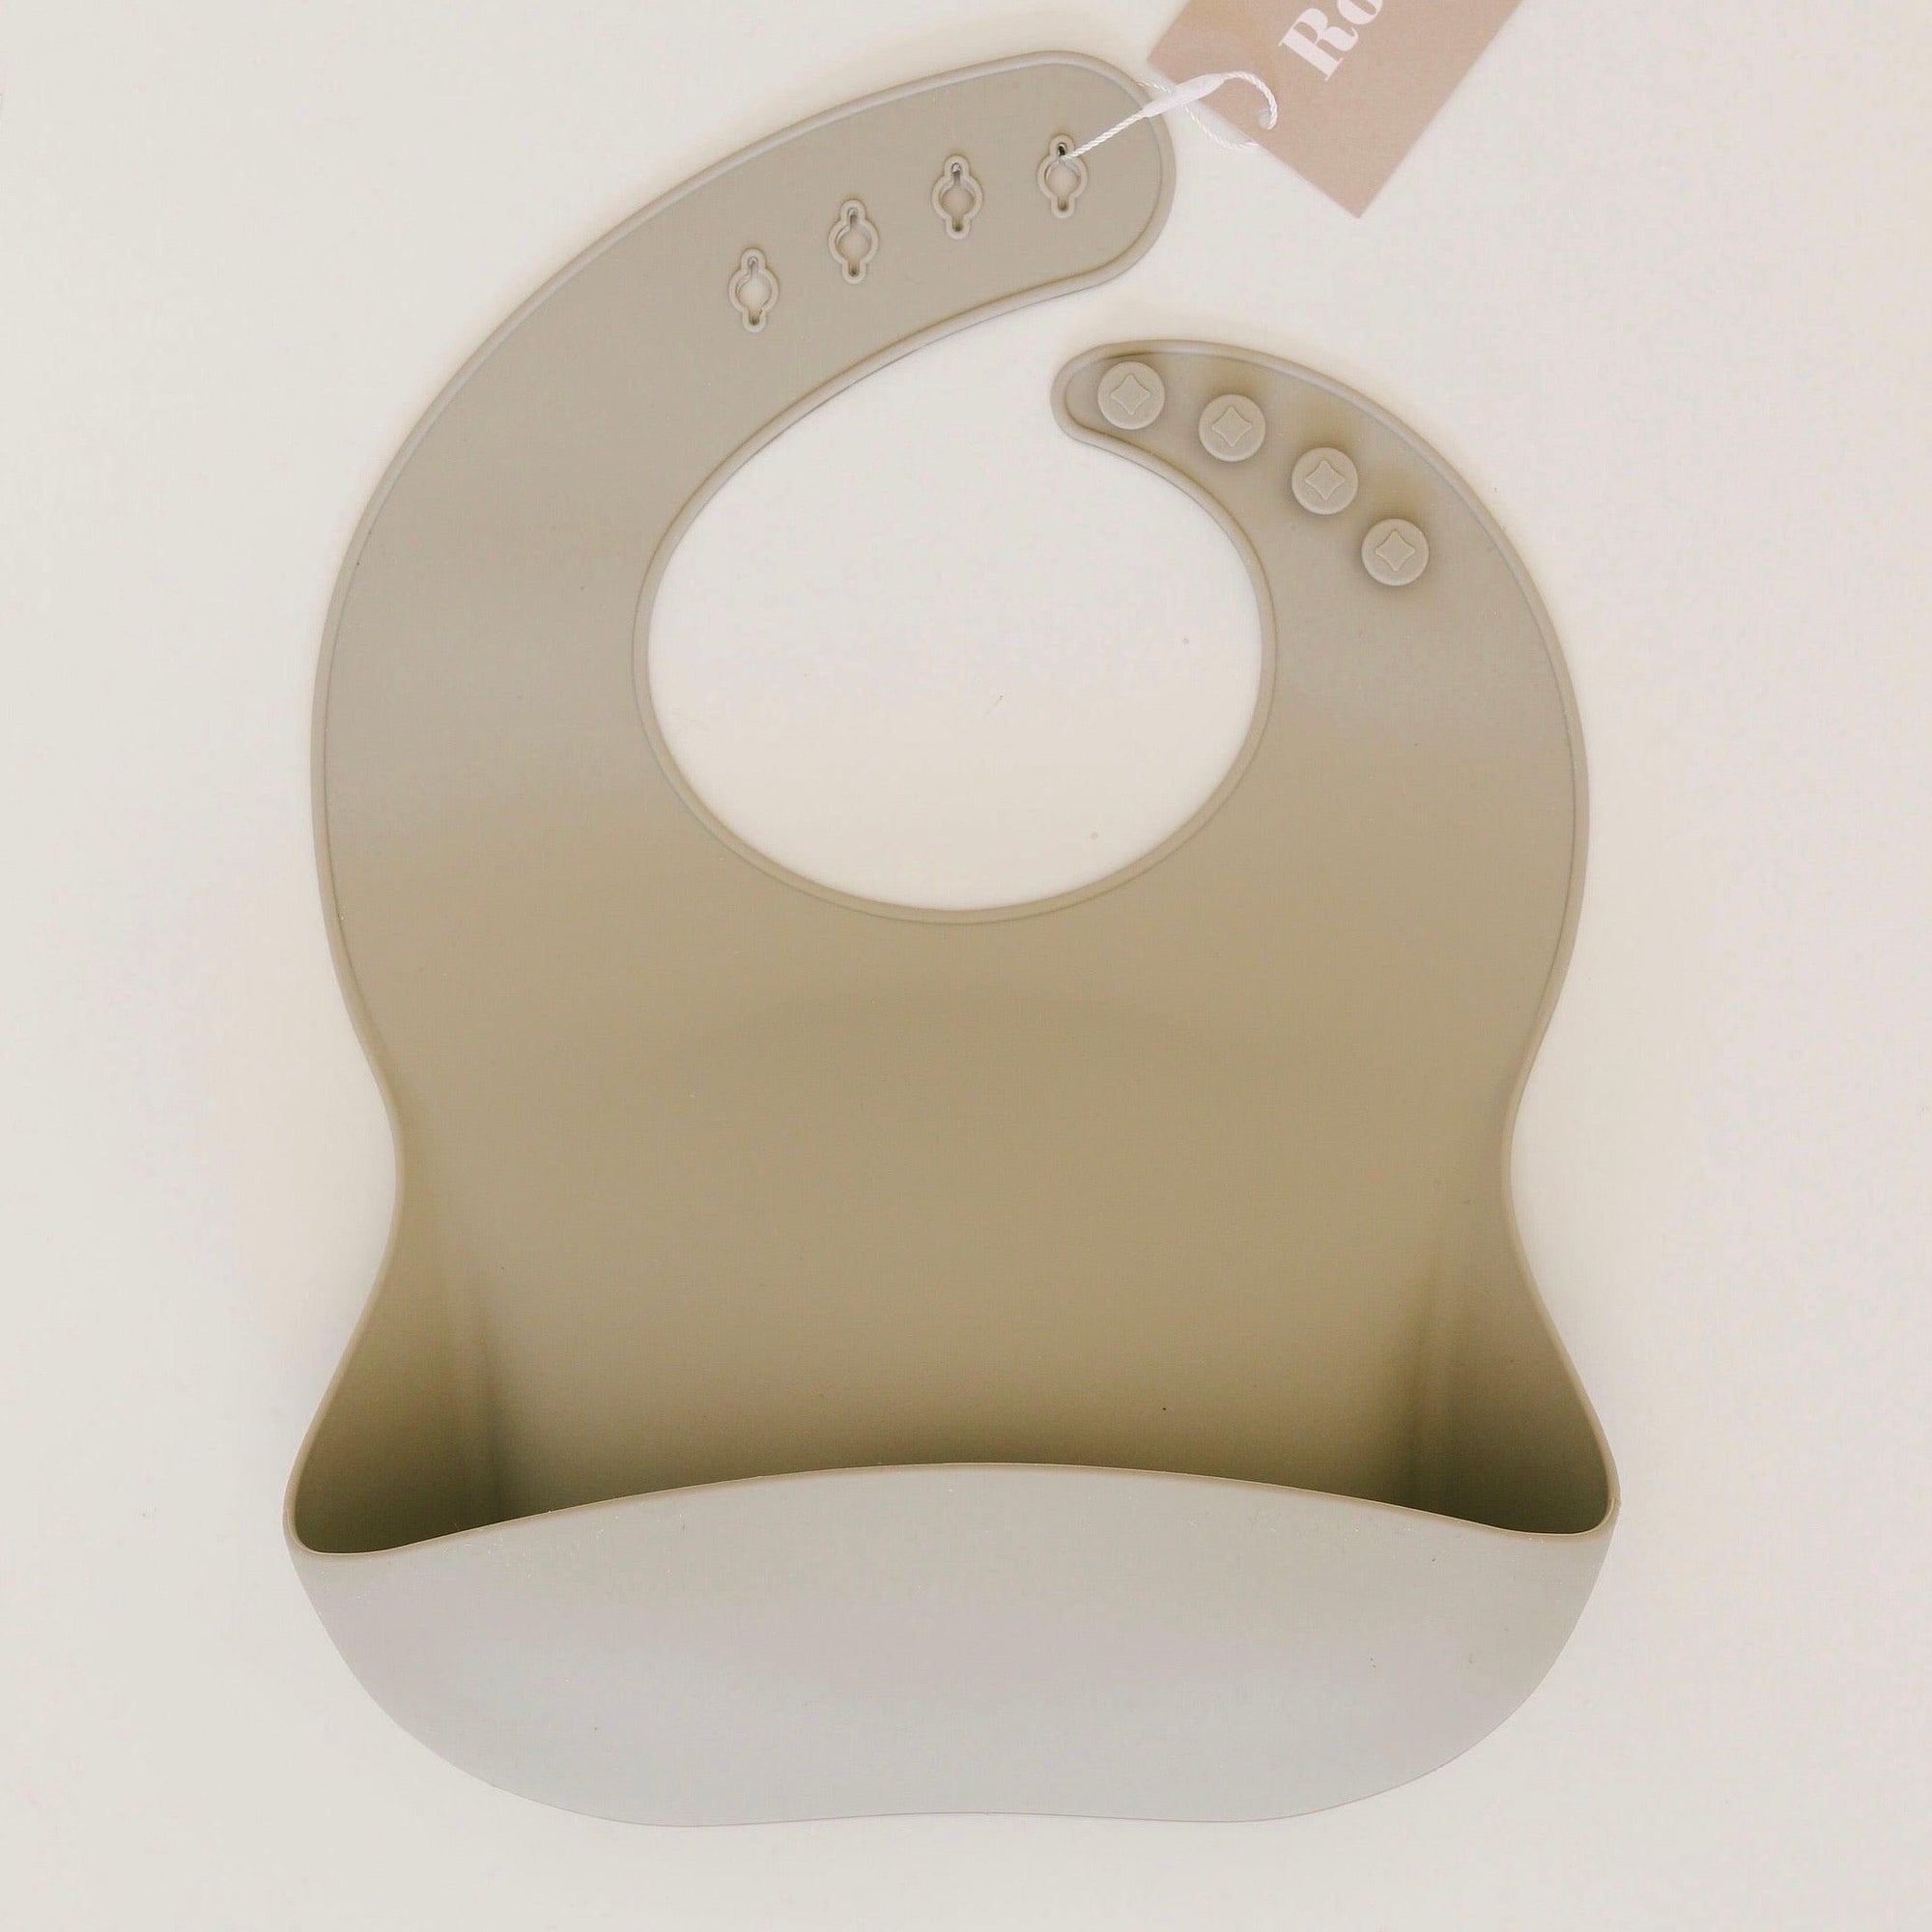 Rommer bibs are made from the softest silicone. They are both lightweight and durable. Rommer has updated the bib design to feature the reinforced button holes making them more resistant to tears. 